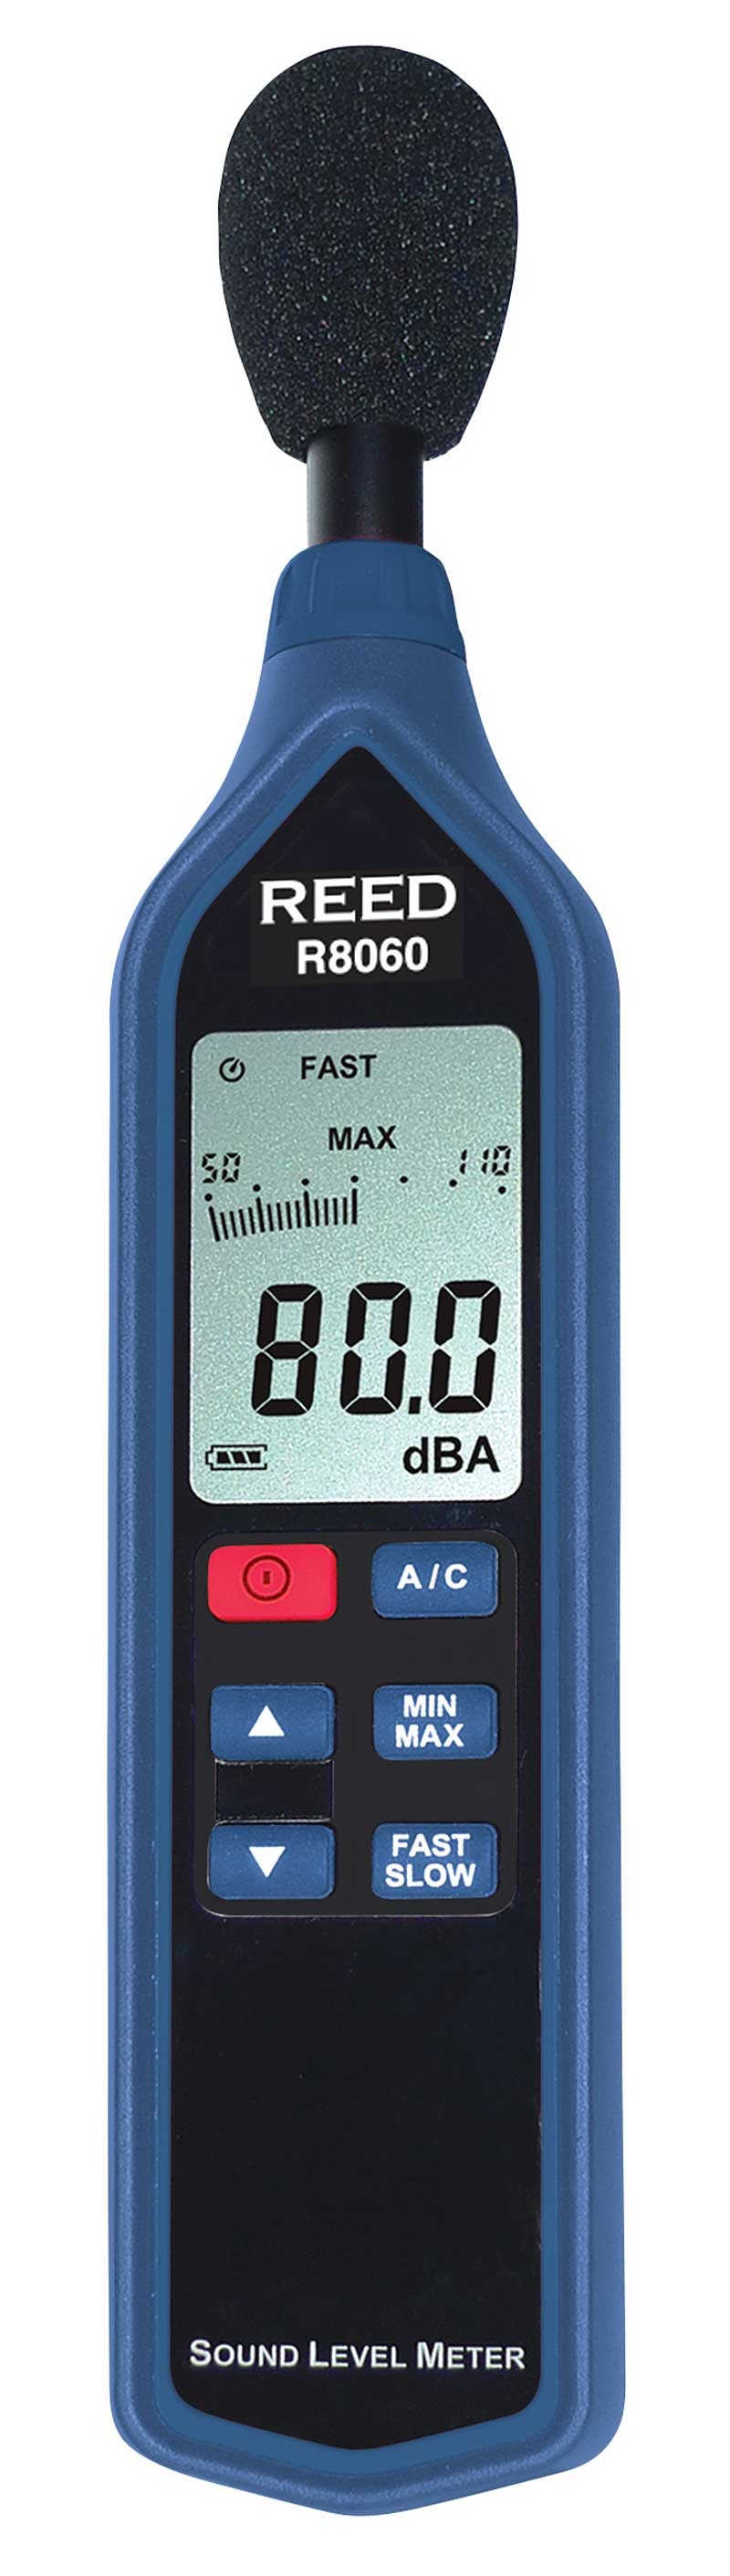 Reed R8060 Sound Level Meter